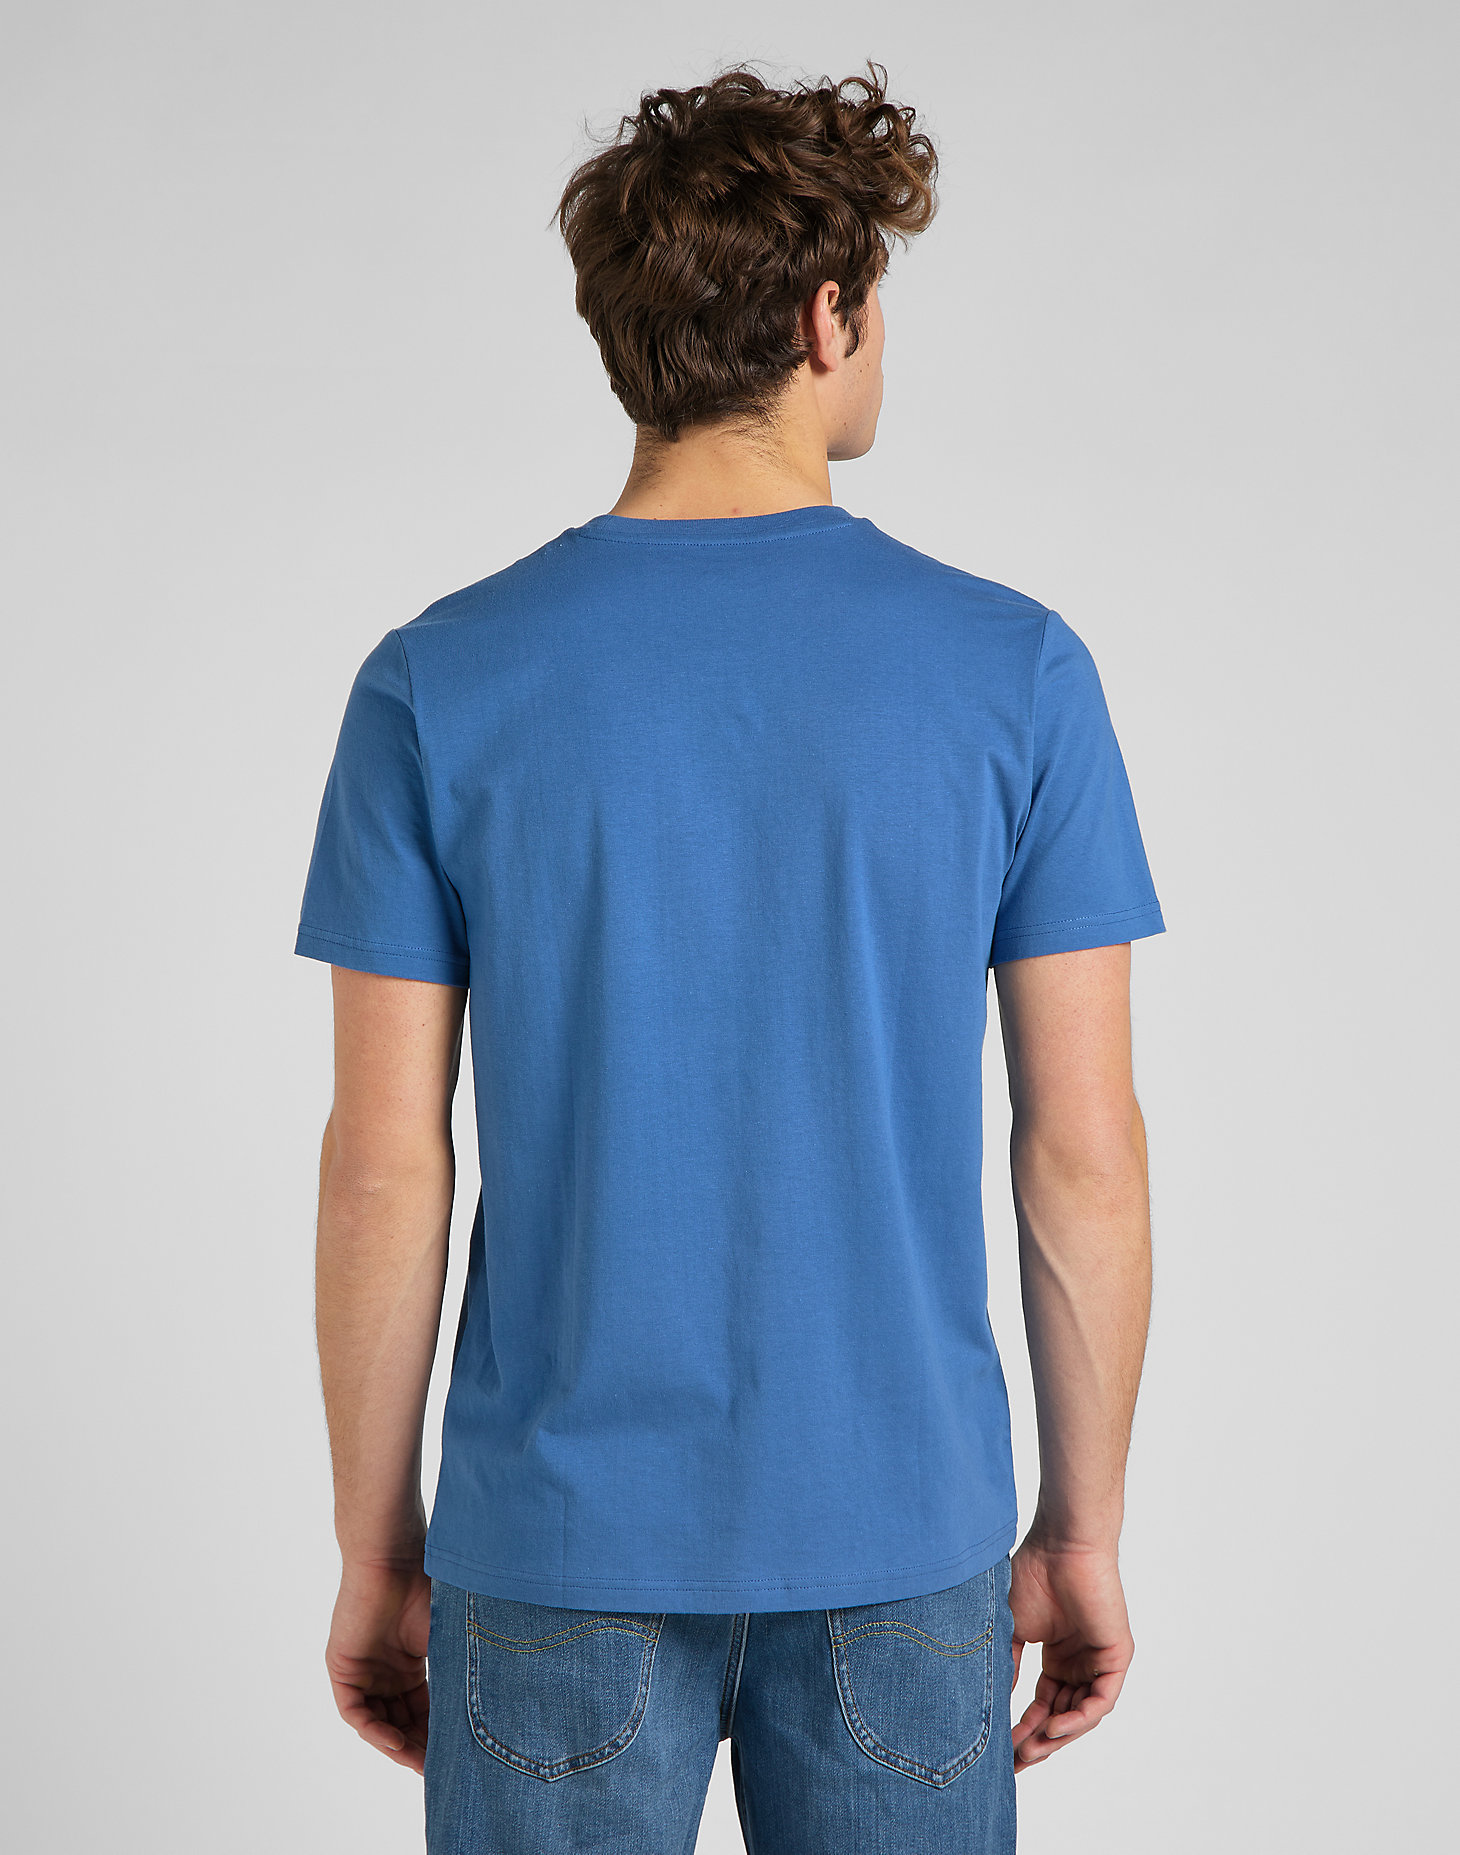 Patch Logo Tee in Blue Union alternative view 1